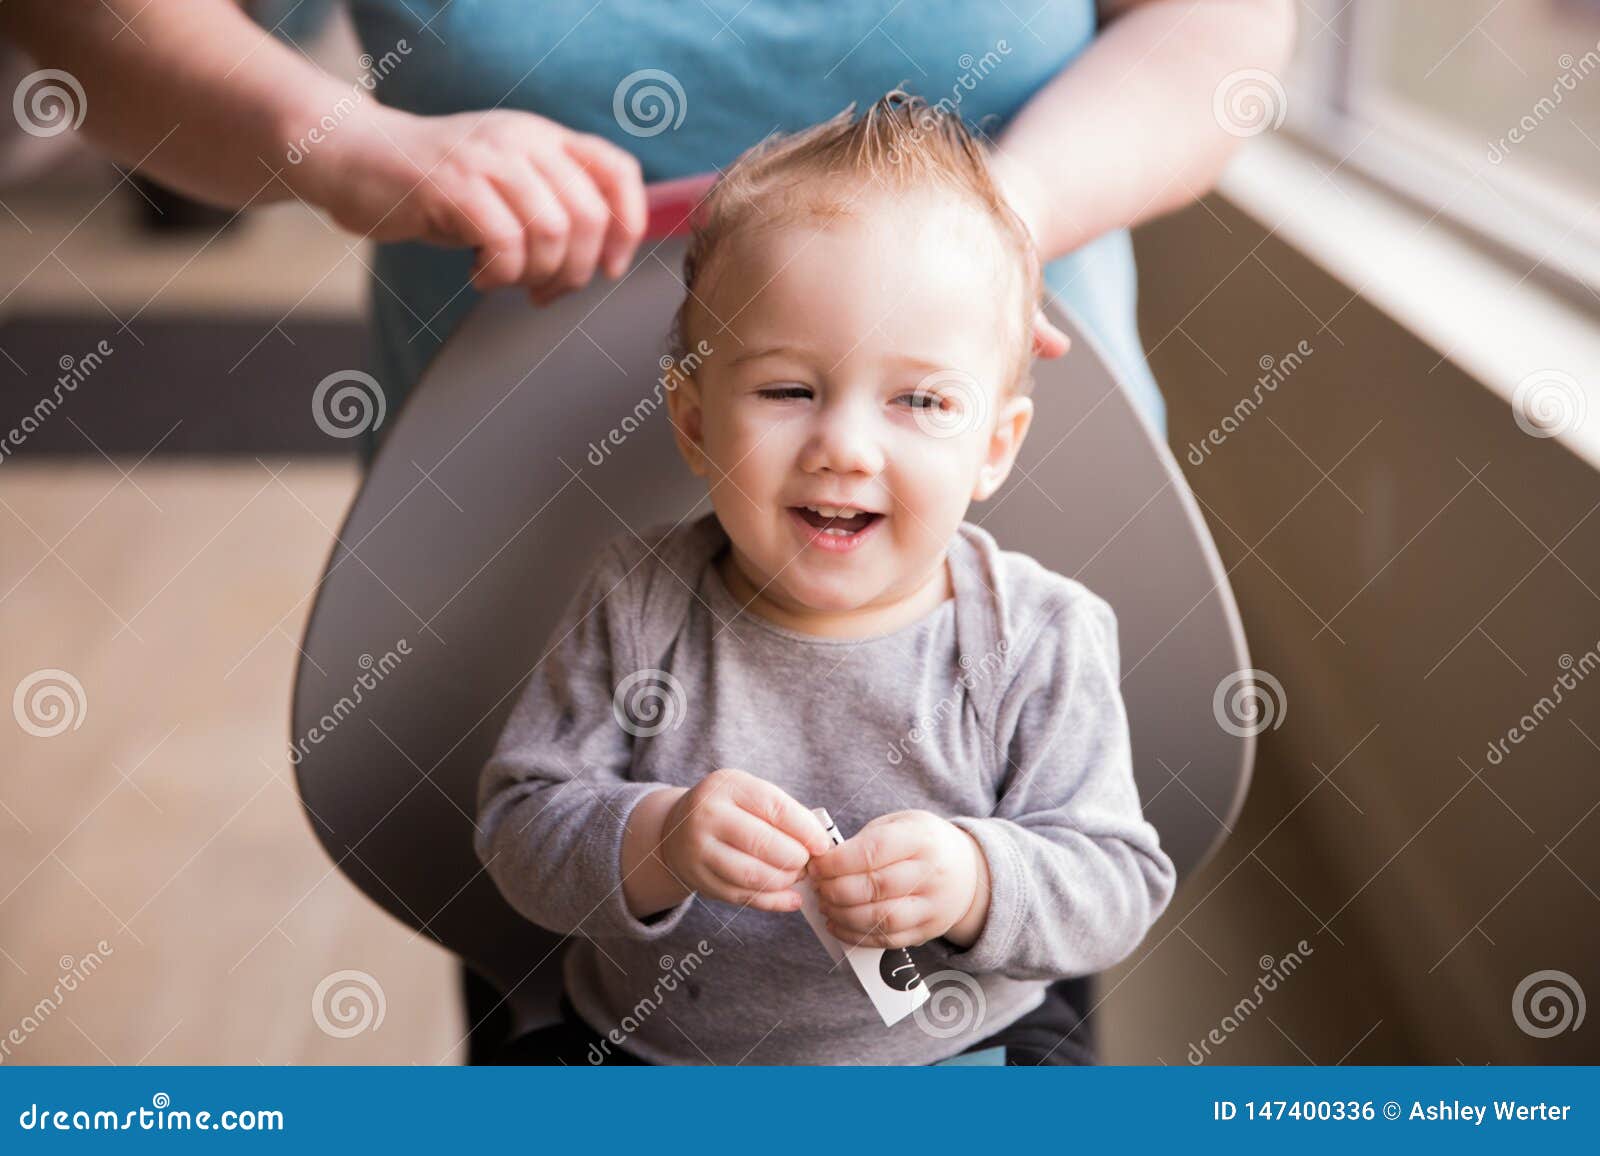 First Haircut For Toddler Boy Stock Photo Image Of Light Cute